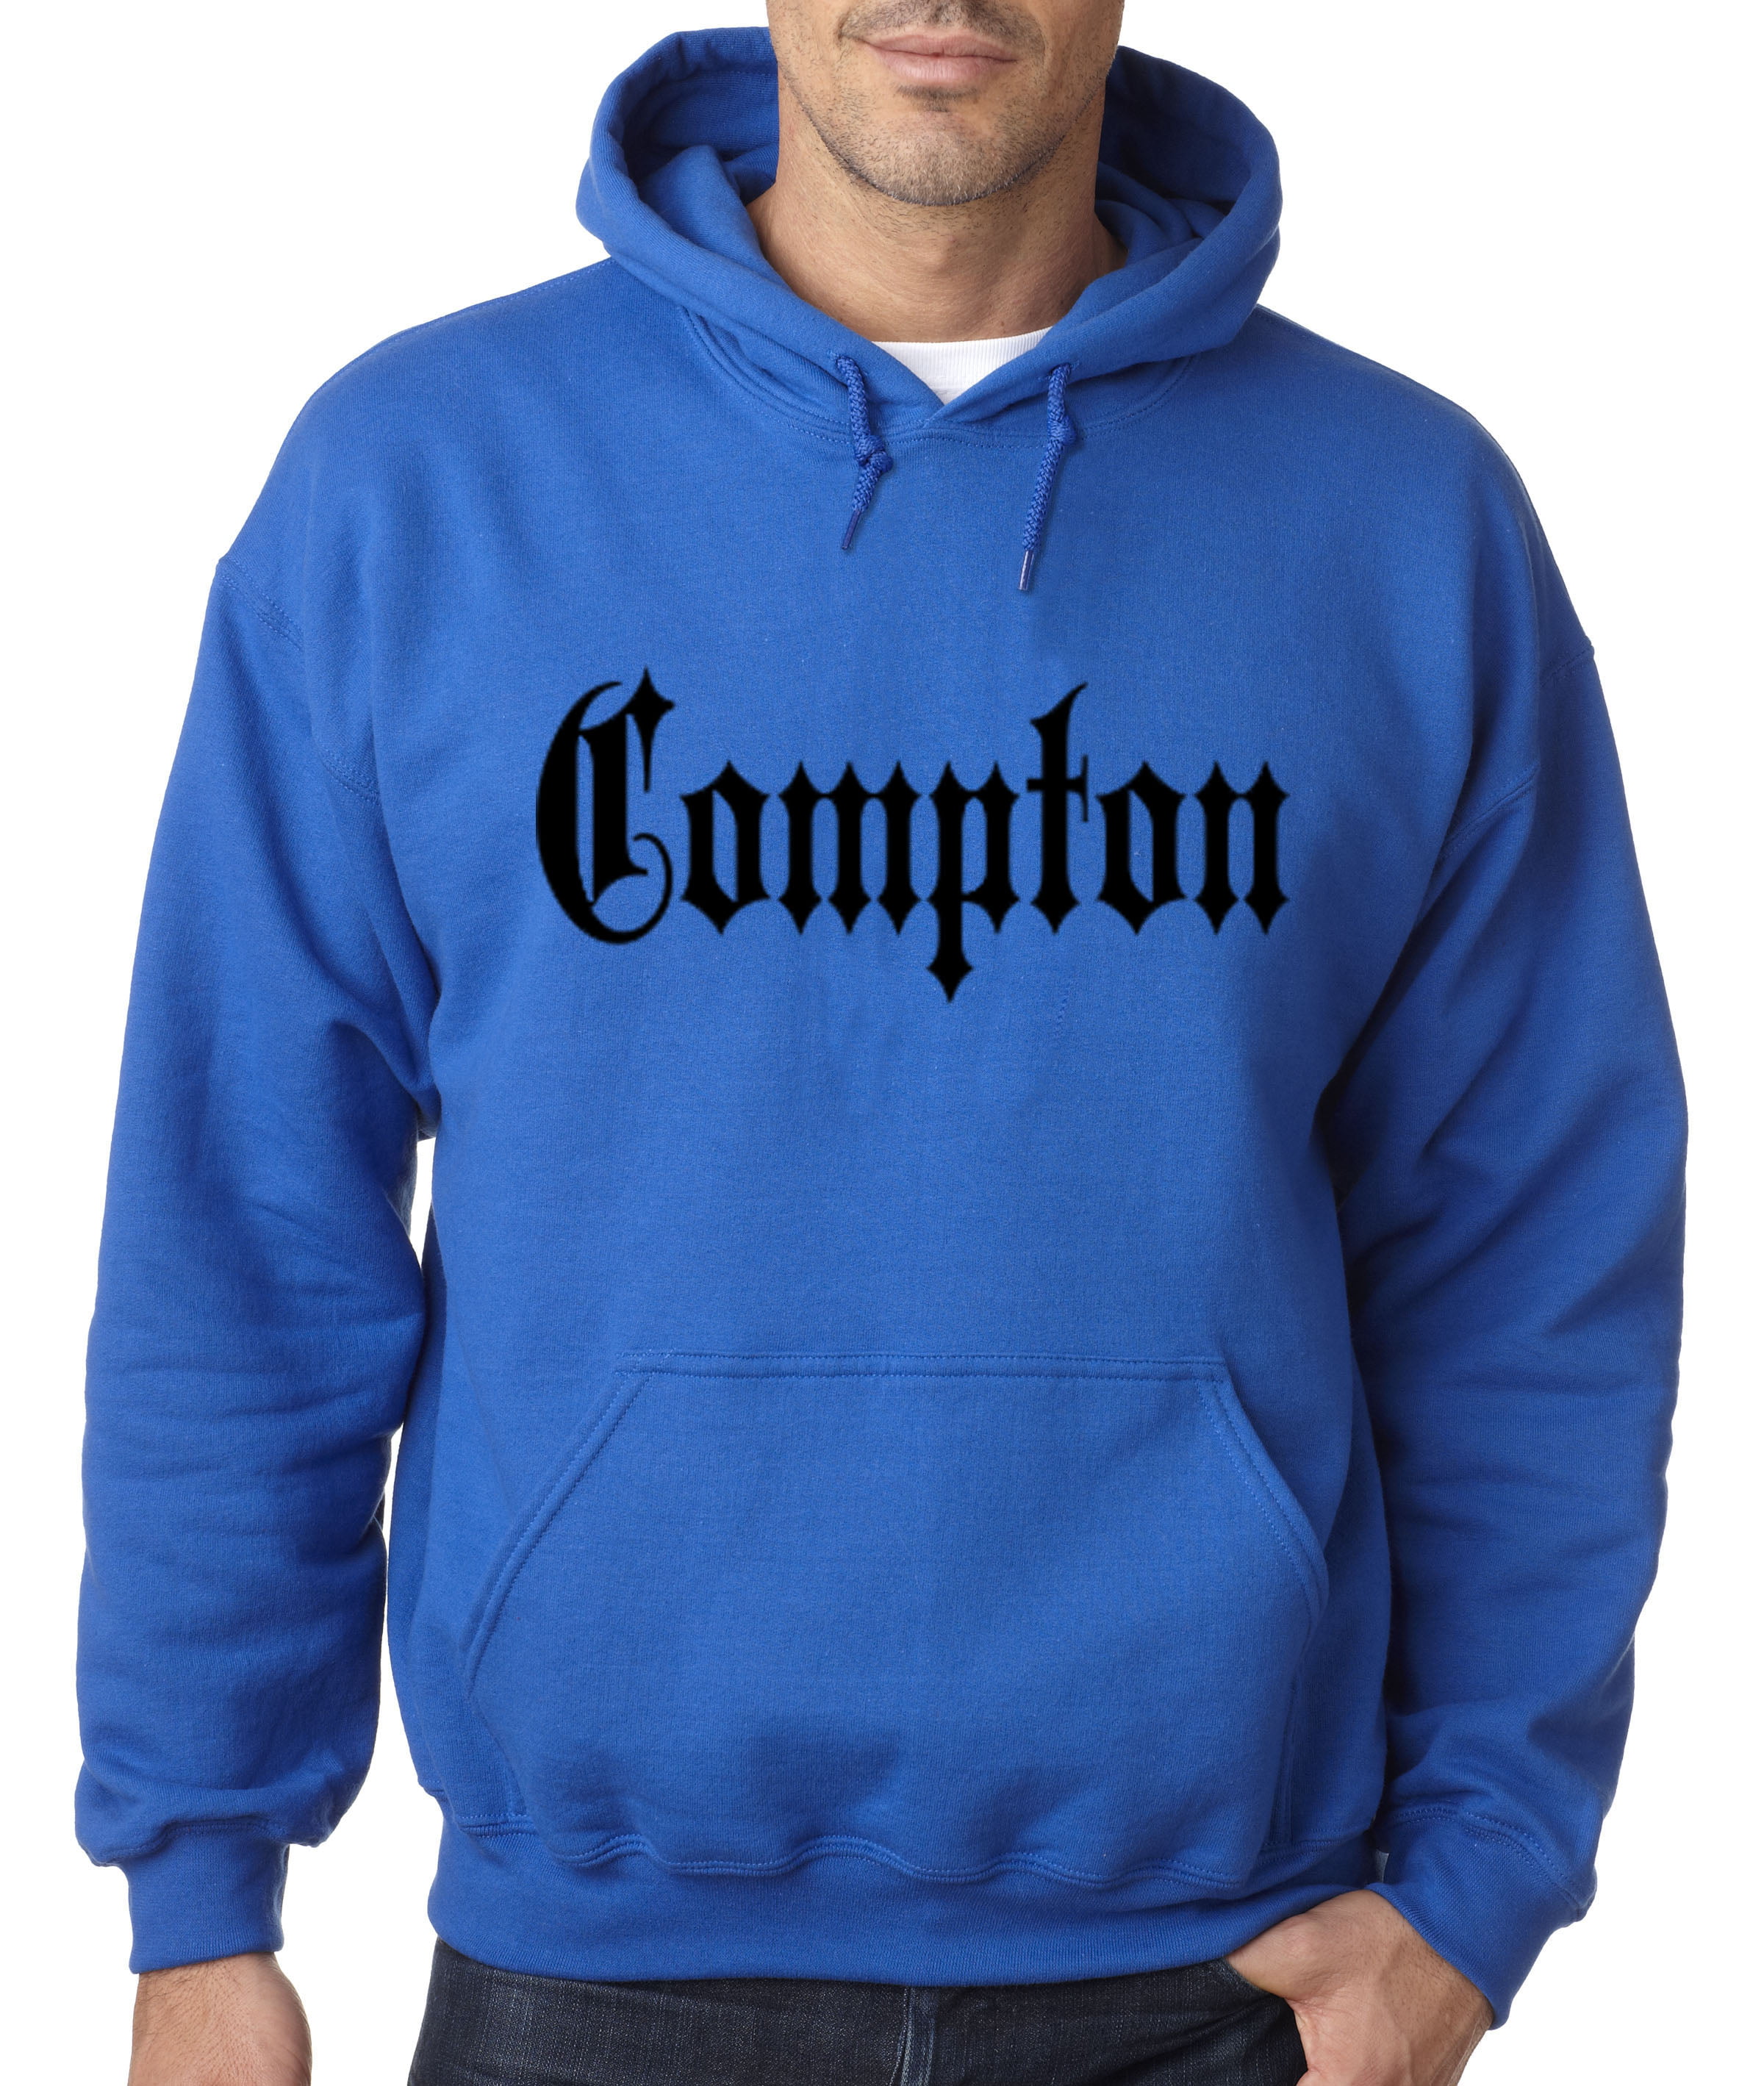 Compton Old English HOODIE Hooded Sweatshirt NWA Straight Outta All Size Colors 